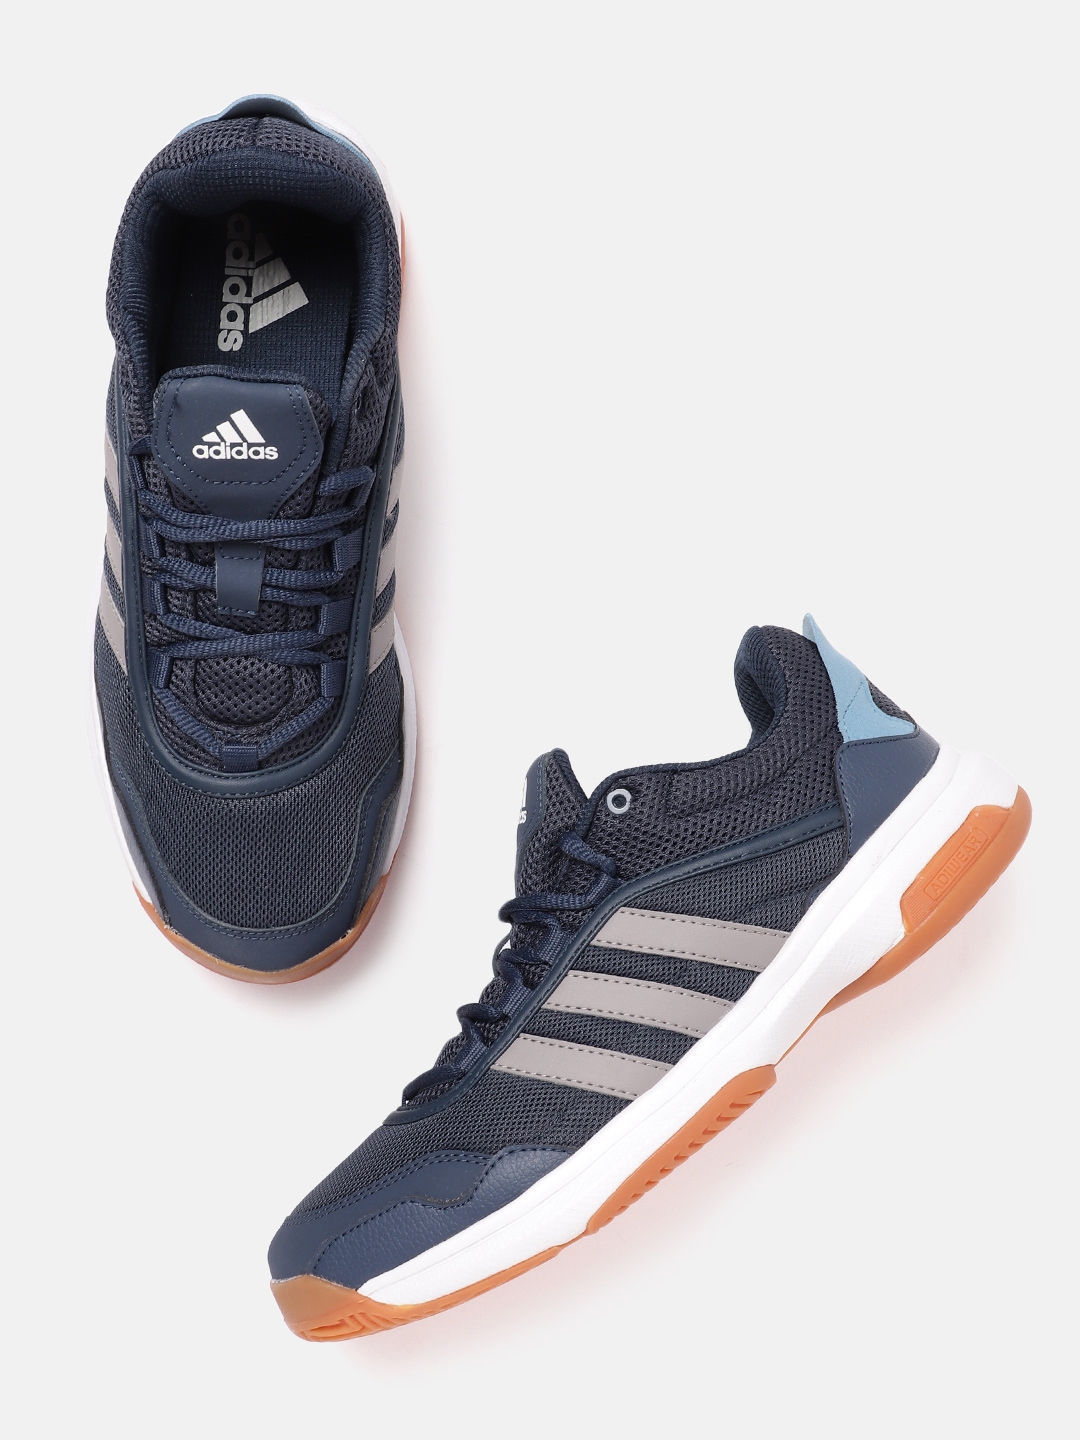 Buy ADIDAS Men Navy Blue Solid 90s NDR Badminton Shoes - Sports Shoes ...